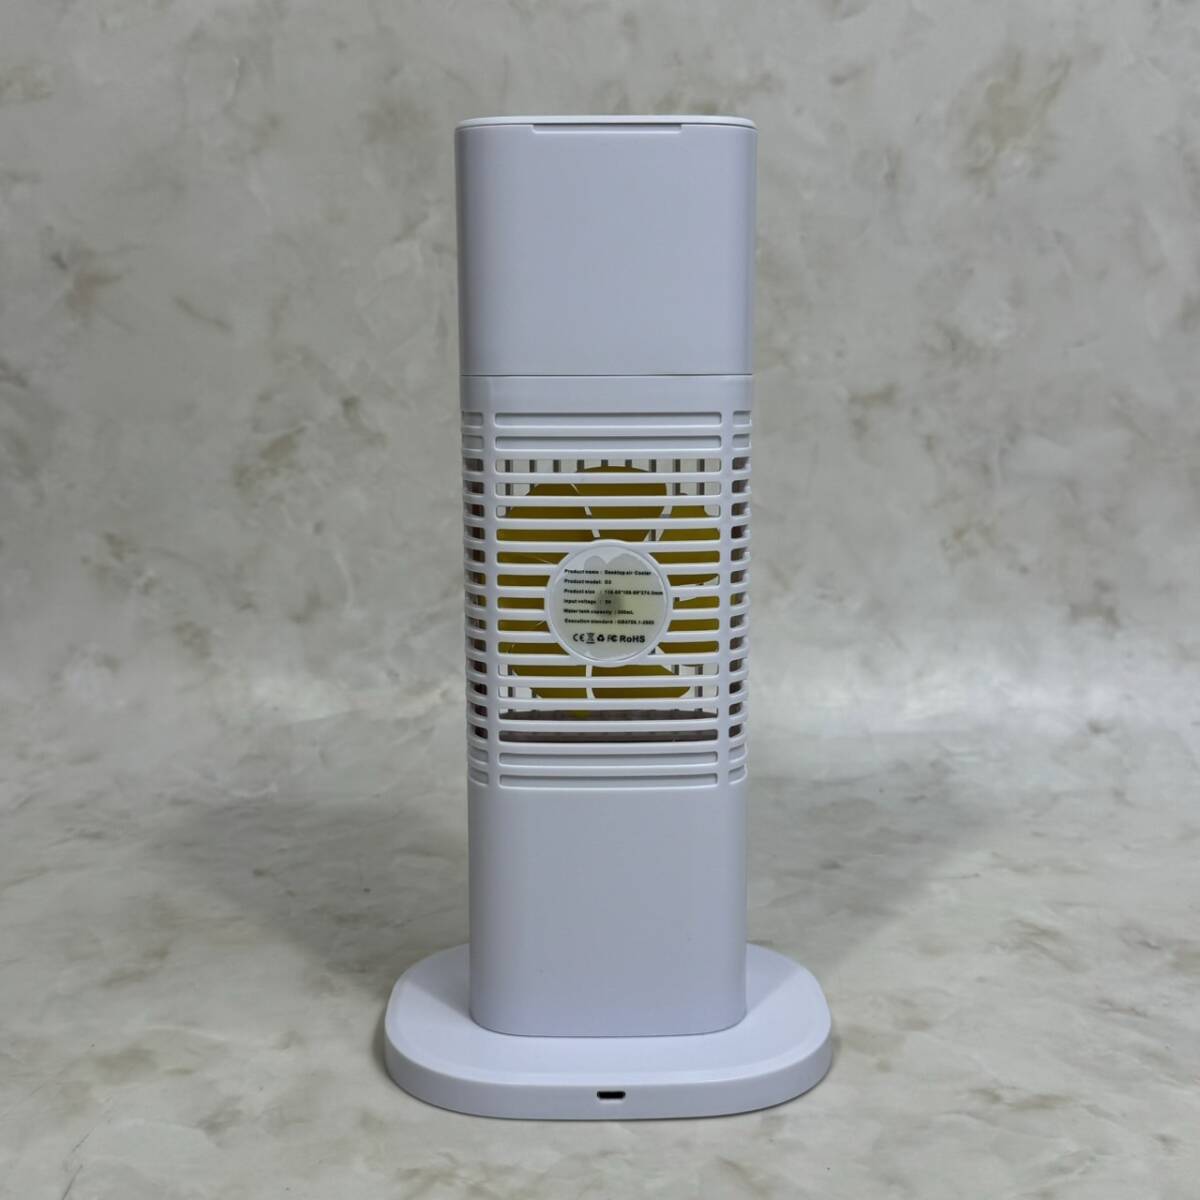 A5426 cold air fan feather less electric fan Mist with function D3 Air Cooler